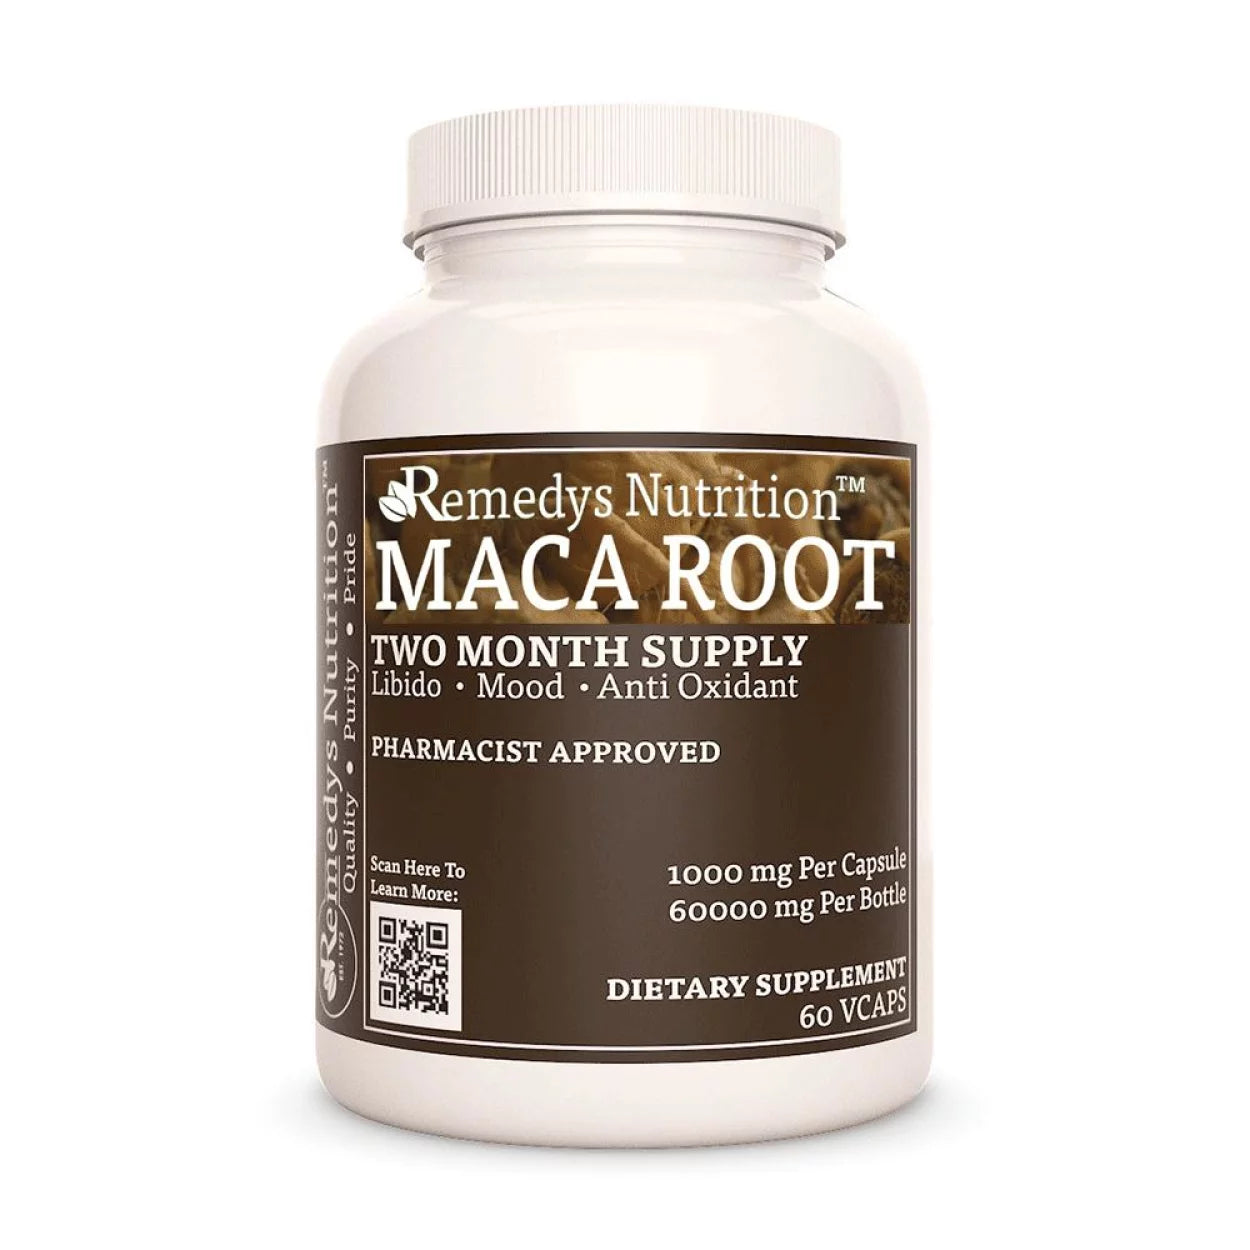 Image of Remedy's Nutrition® Maca Root Capsules Herbal Dietary Supplement front bottle. Made in the USA. Lepidium meyenii.